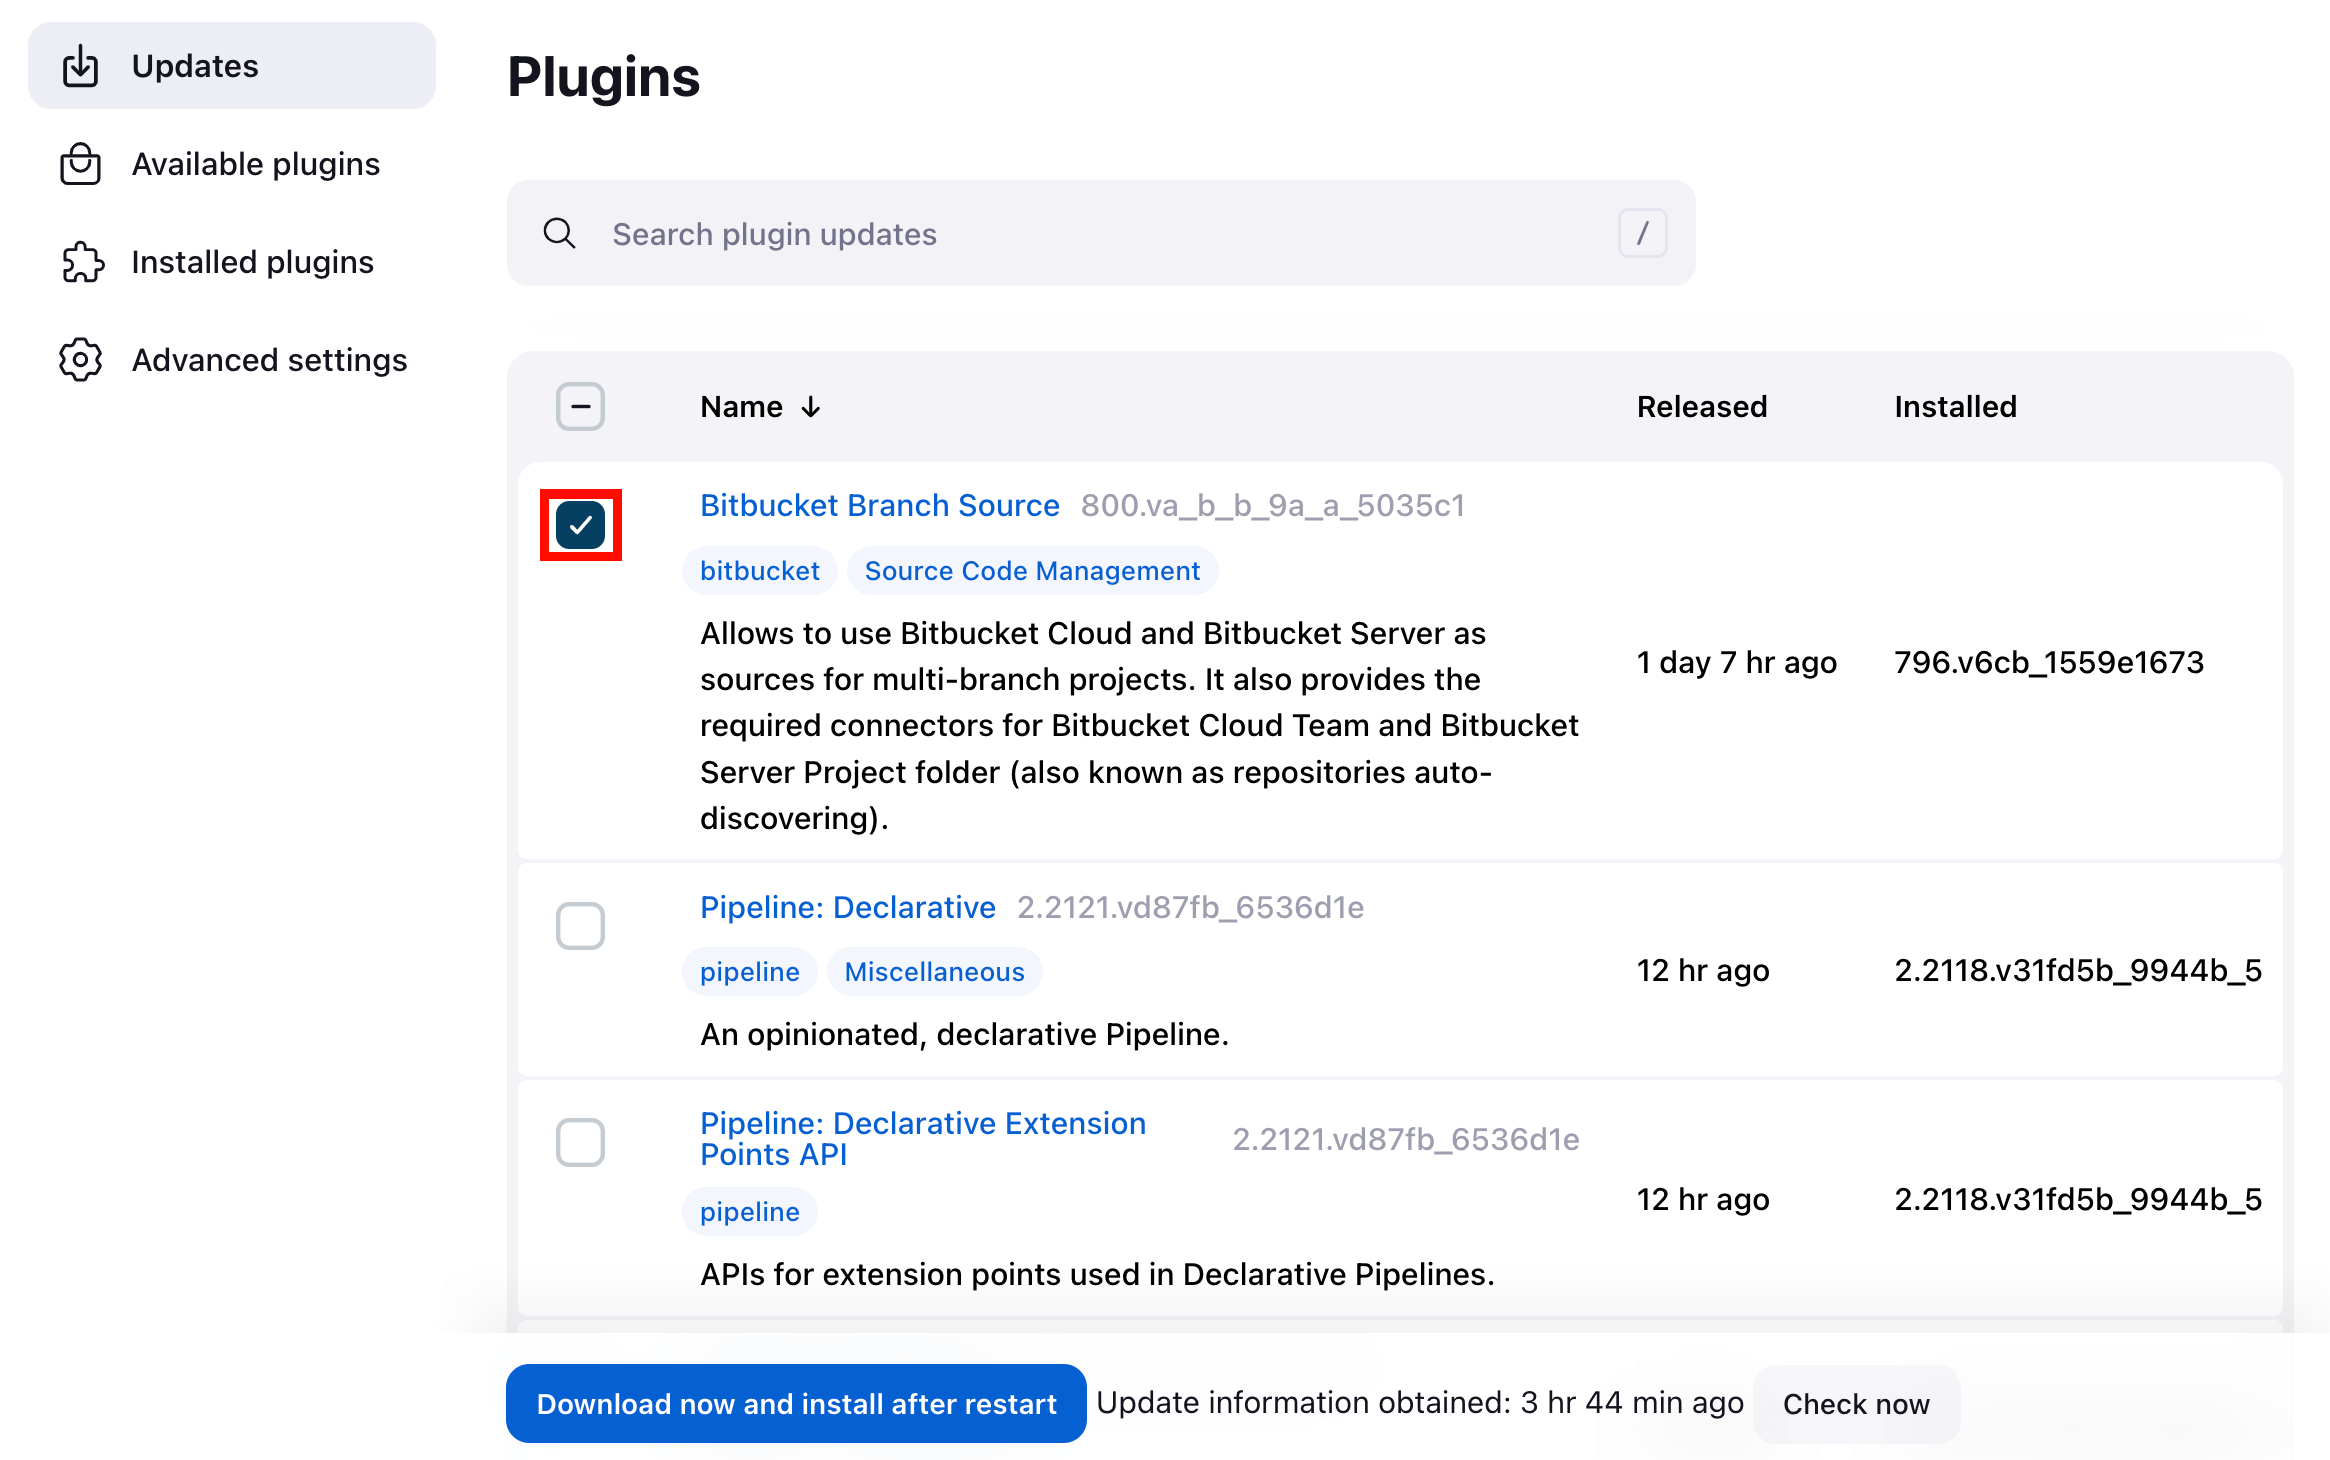 none of the available installer plugins